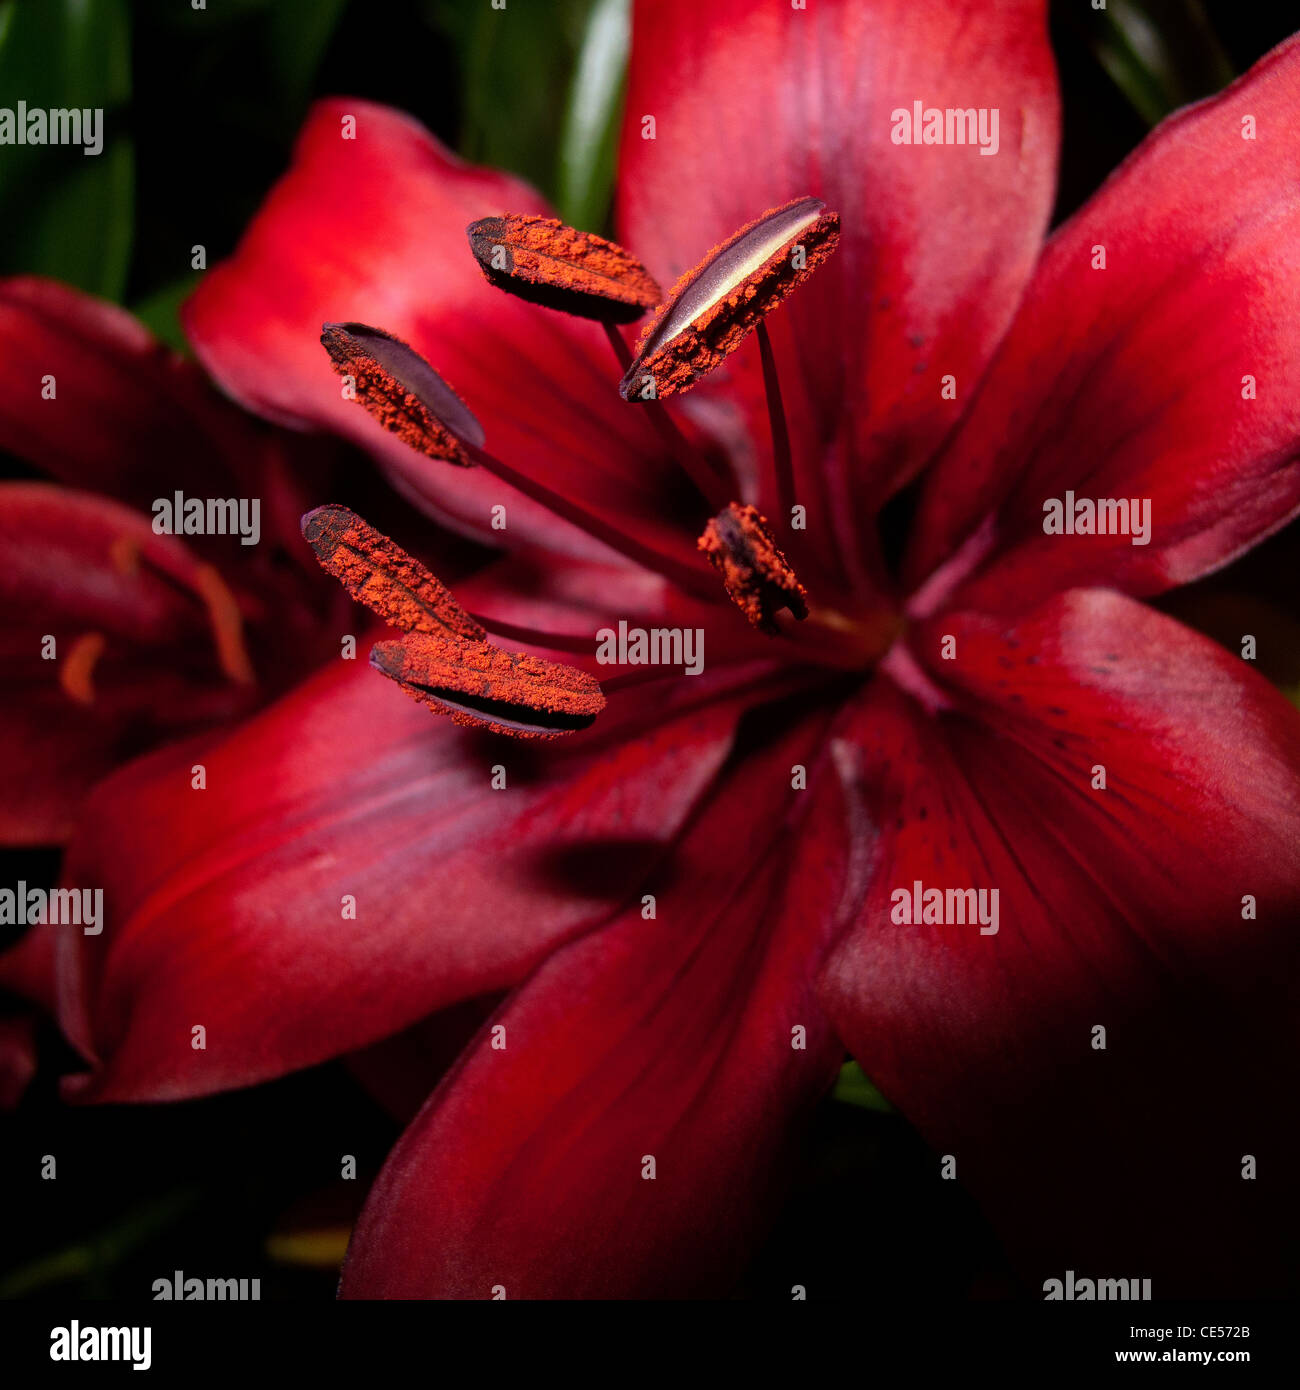 Glorious, elegant and exotic,  red Lily flower, which inspires feelings of passion, love and desire. Stock Photo